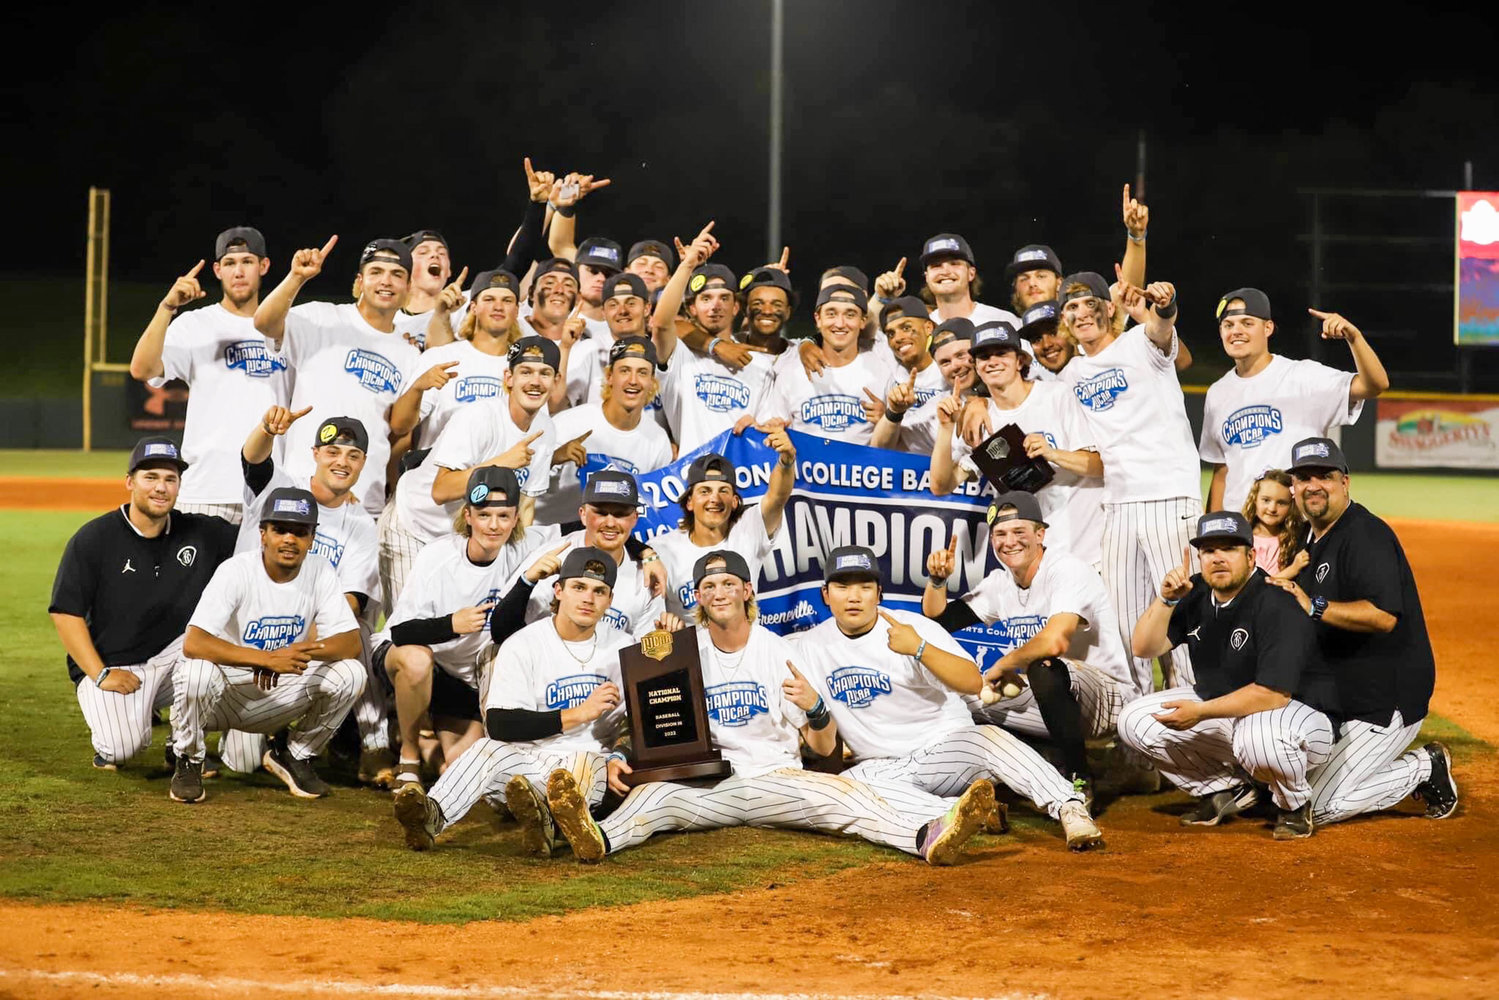 The Herkimer College baseball team is the first New York state-based squad to win the National Junior College Athletic Association’s Division III World Series title.